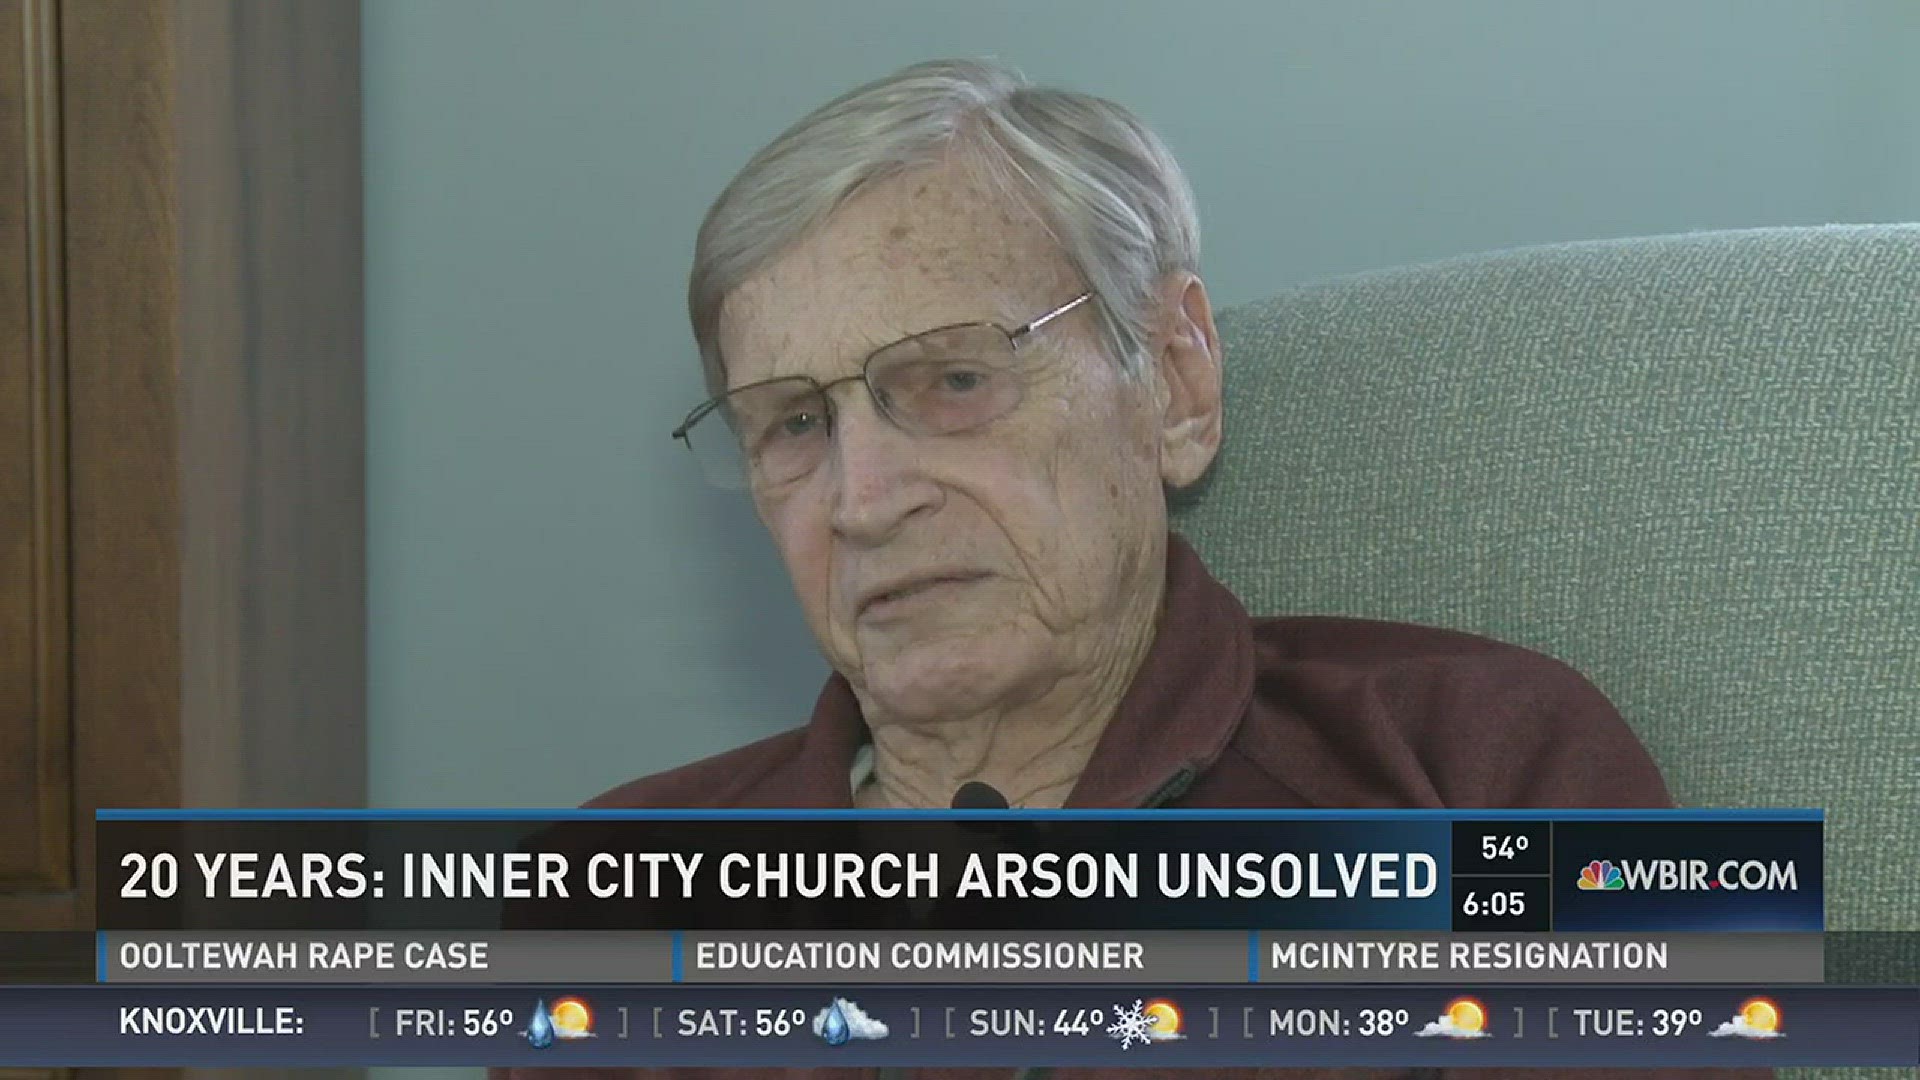 It's been 20 years since Inner City Church in Knoxville burned in a deliberate fire. It's a case that's till unsolved.